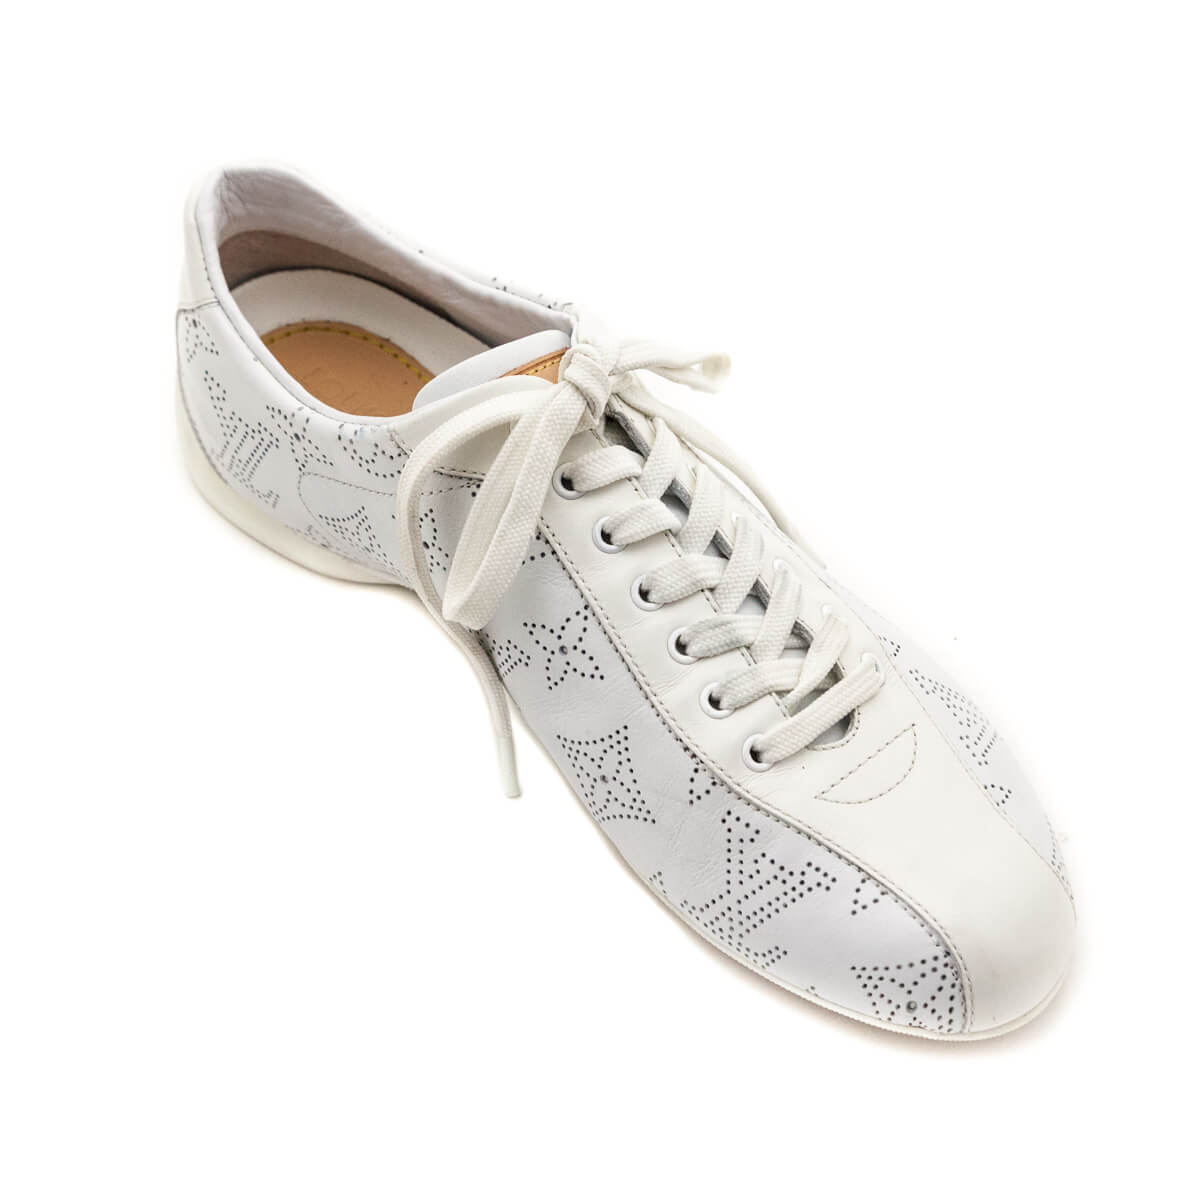 Louis Vuitton, Shoes, Louis Vuitton Perforated White Mahina Leather Low  Top Monogram Sneakers Us